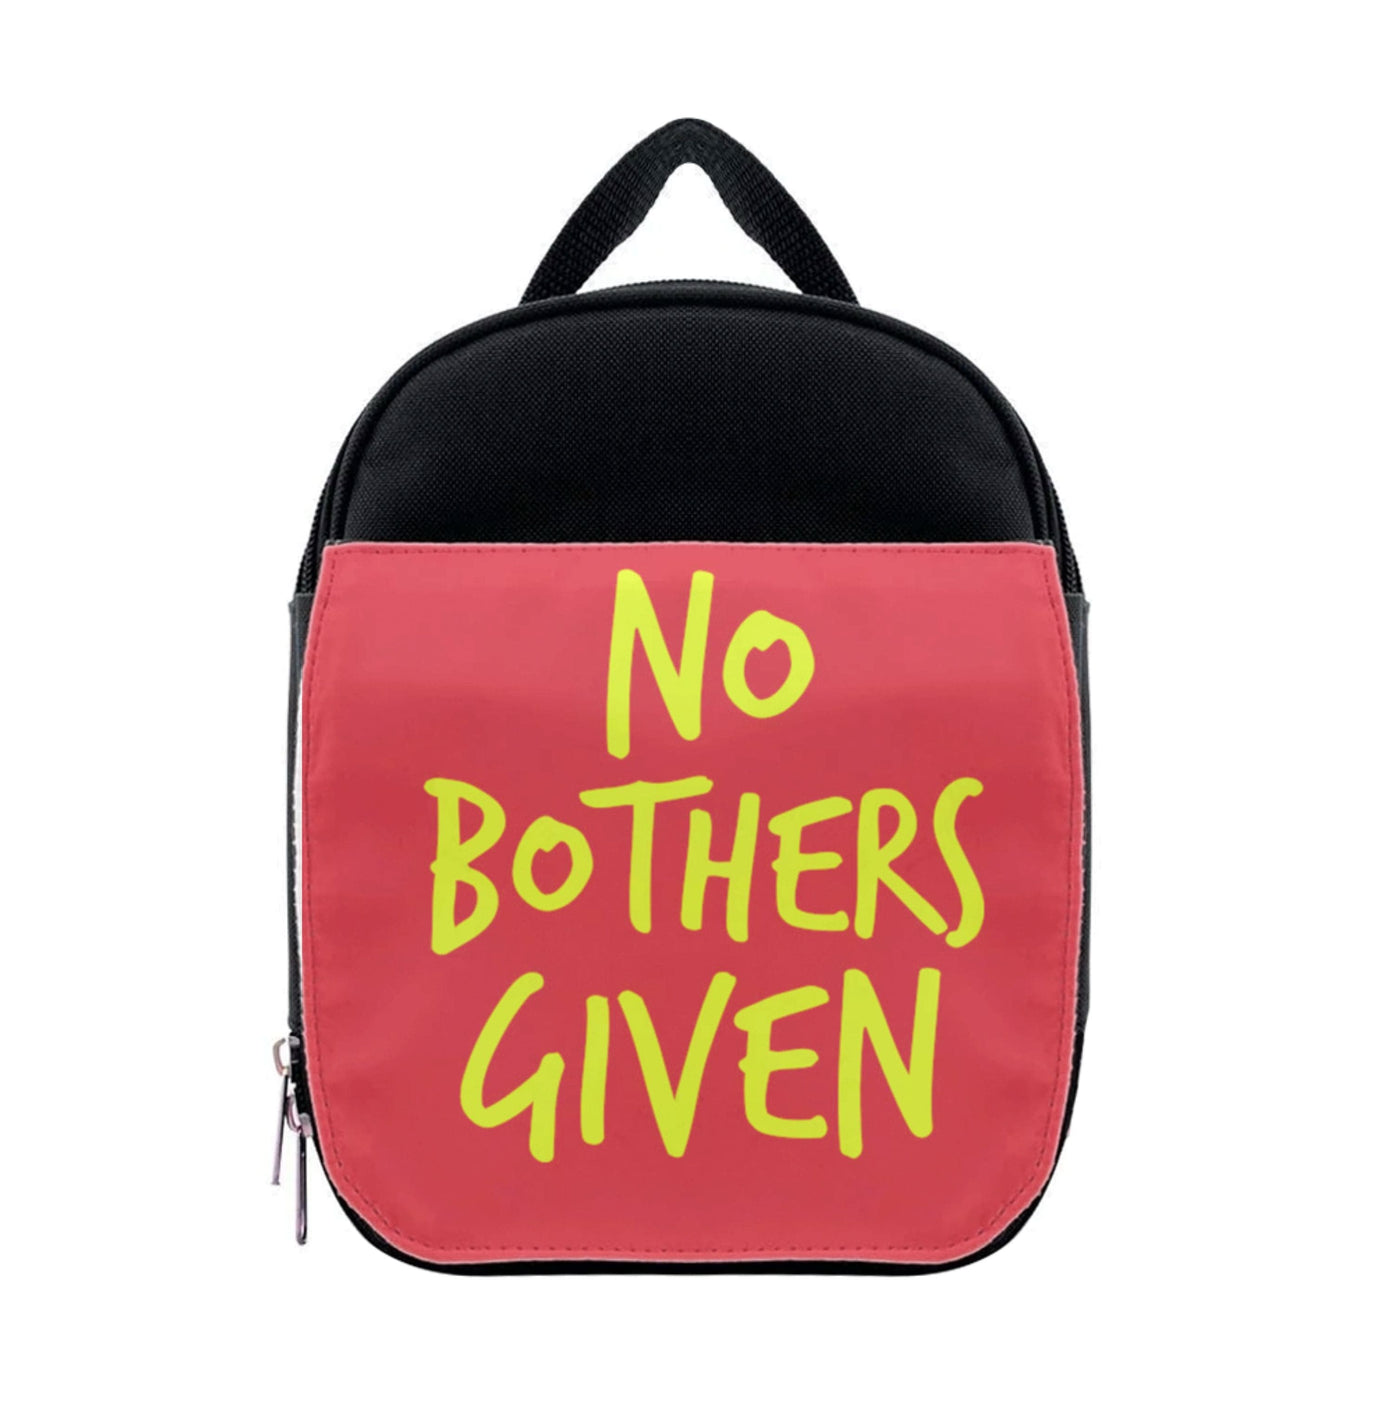 No Bothers Given - Winnie The Pooh Disney Lunchbox